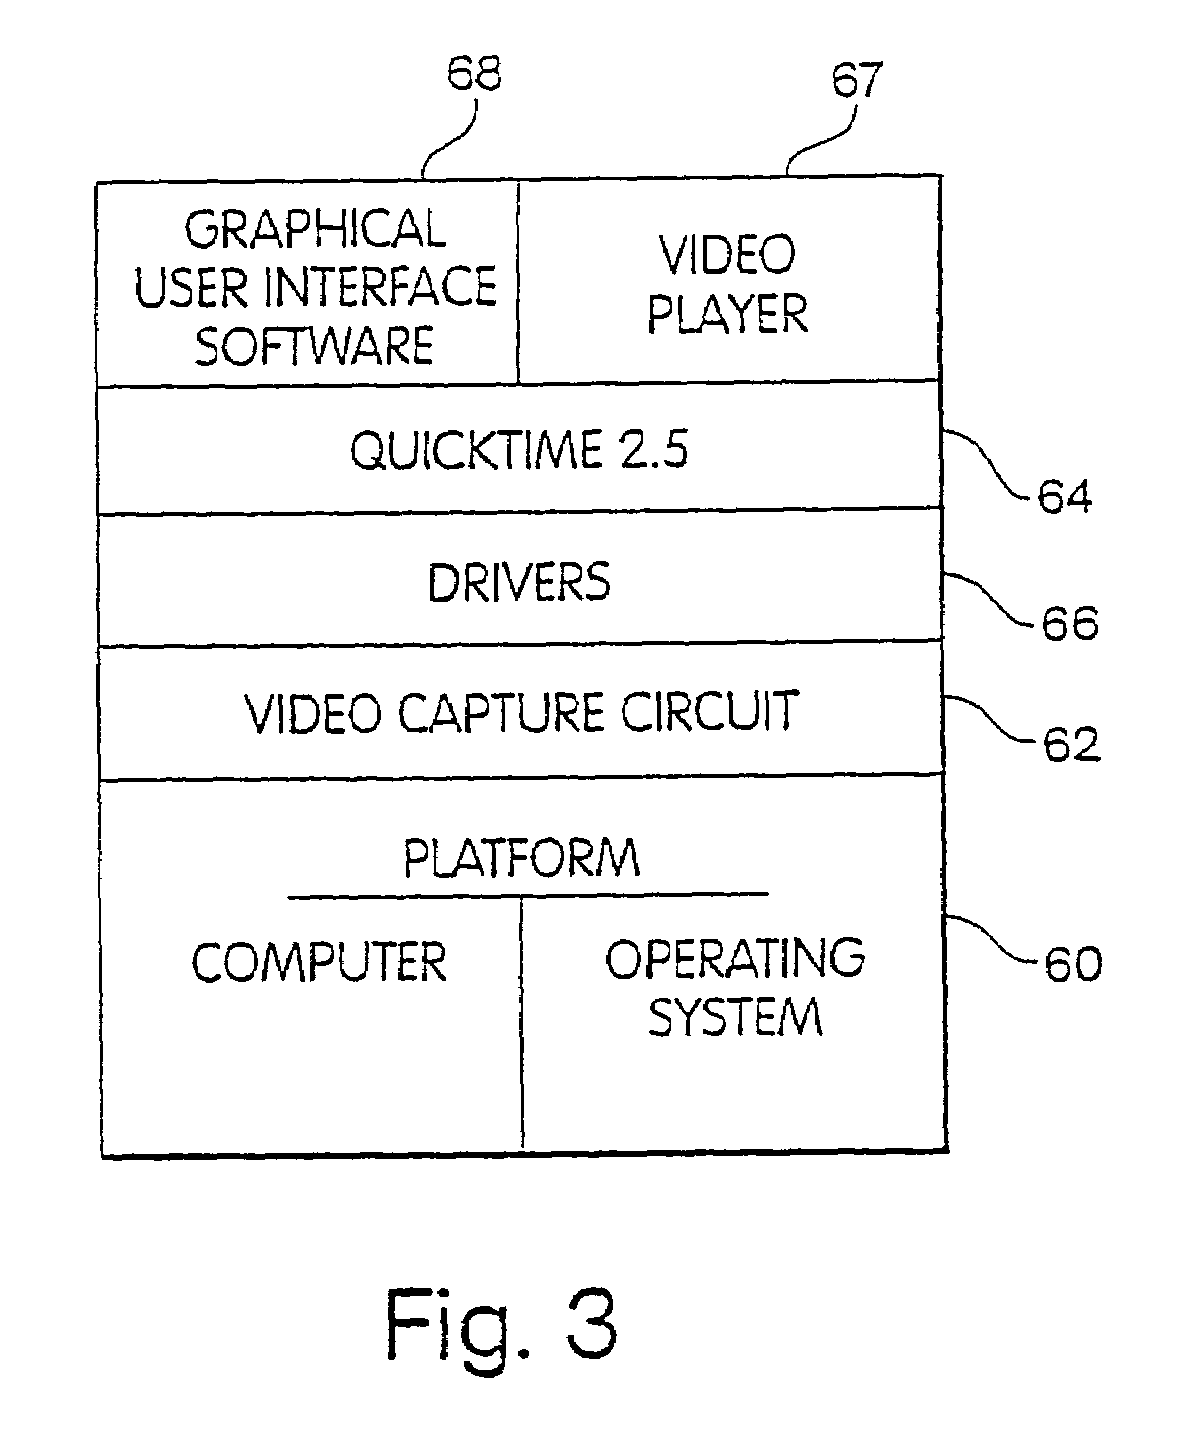 Graphical user interface for a motion video planning and editing system for a computer